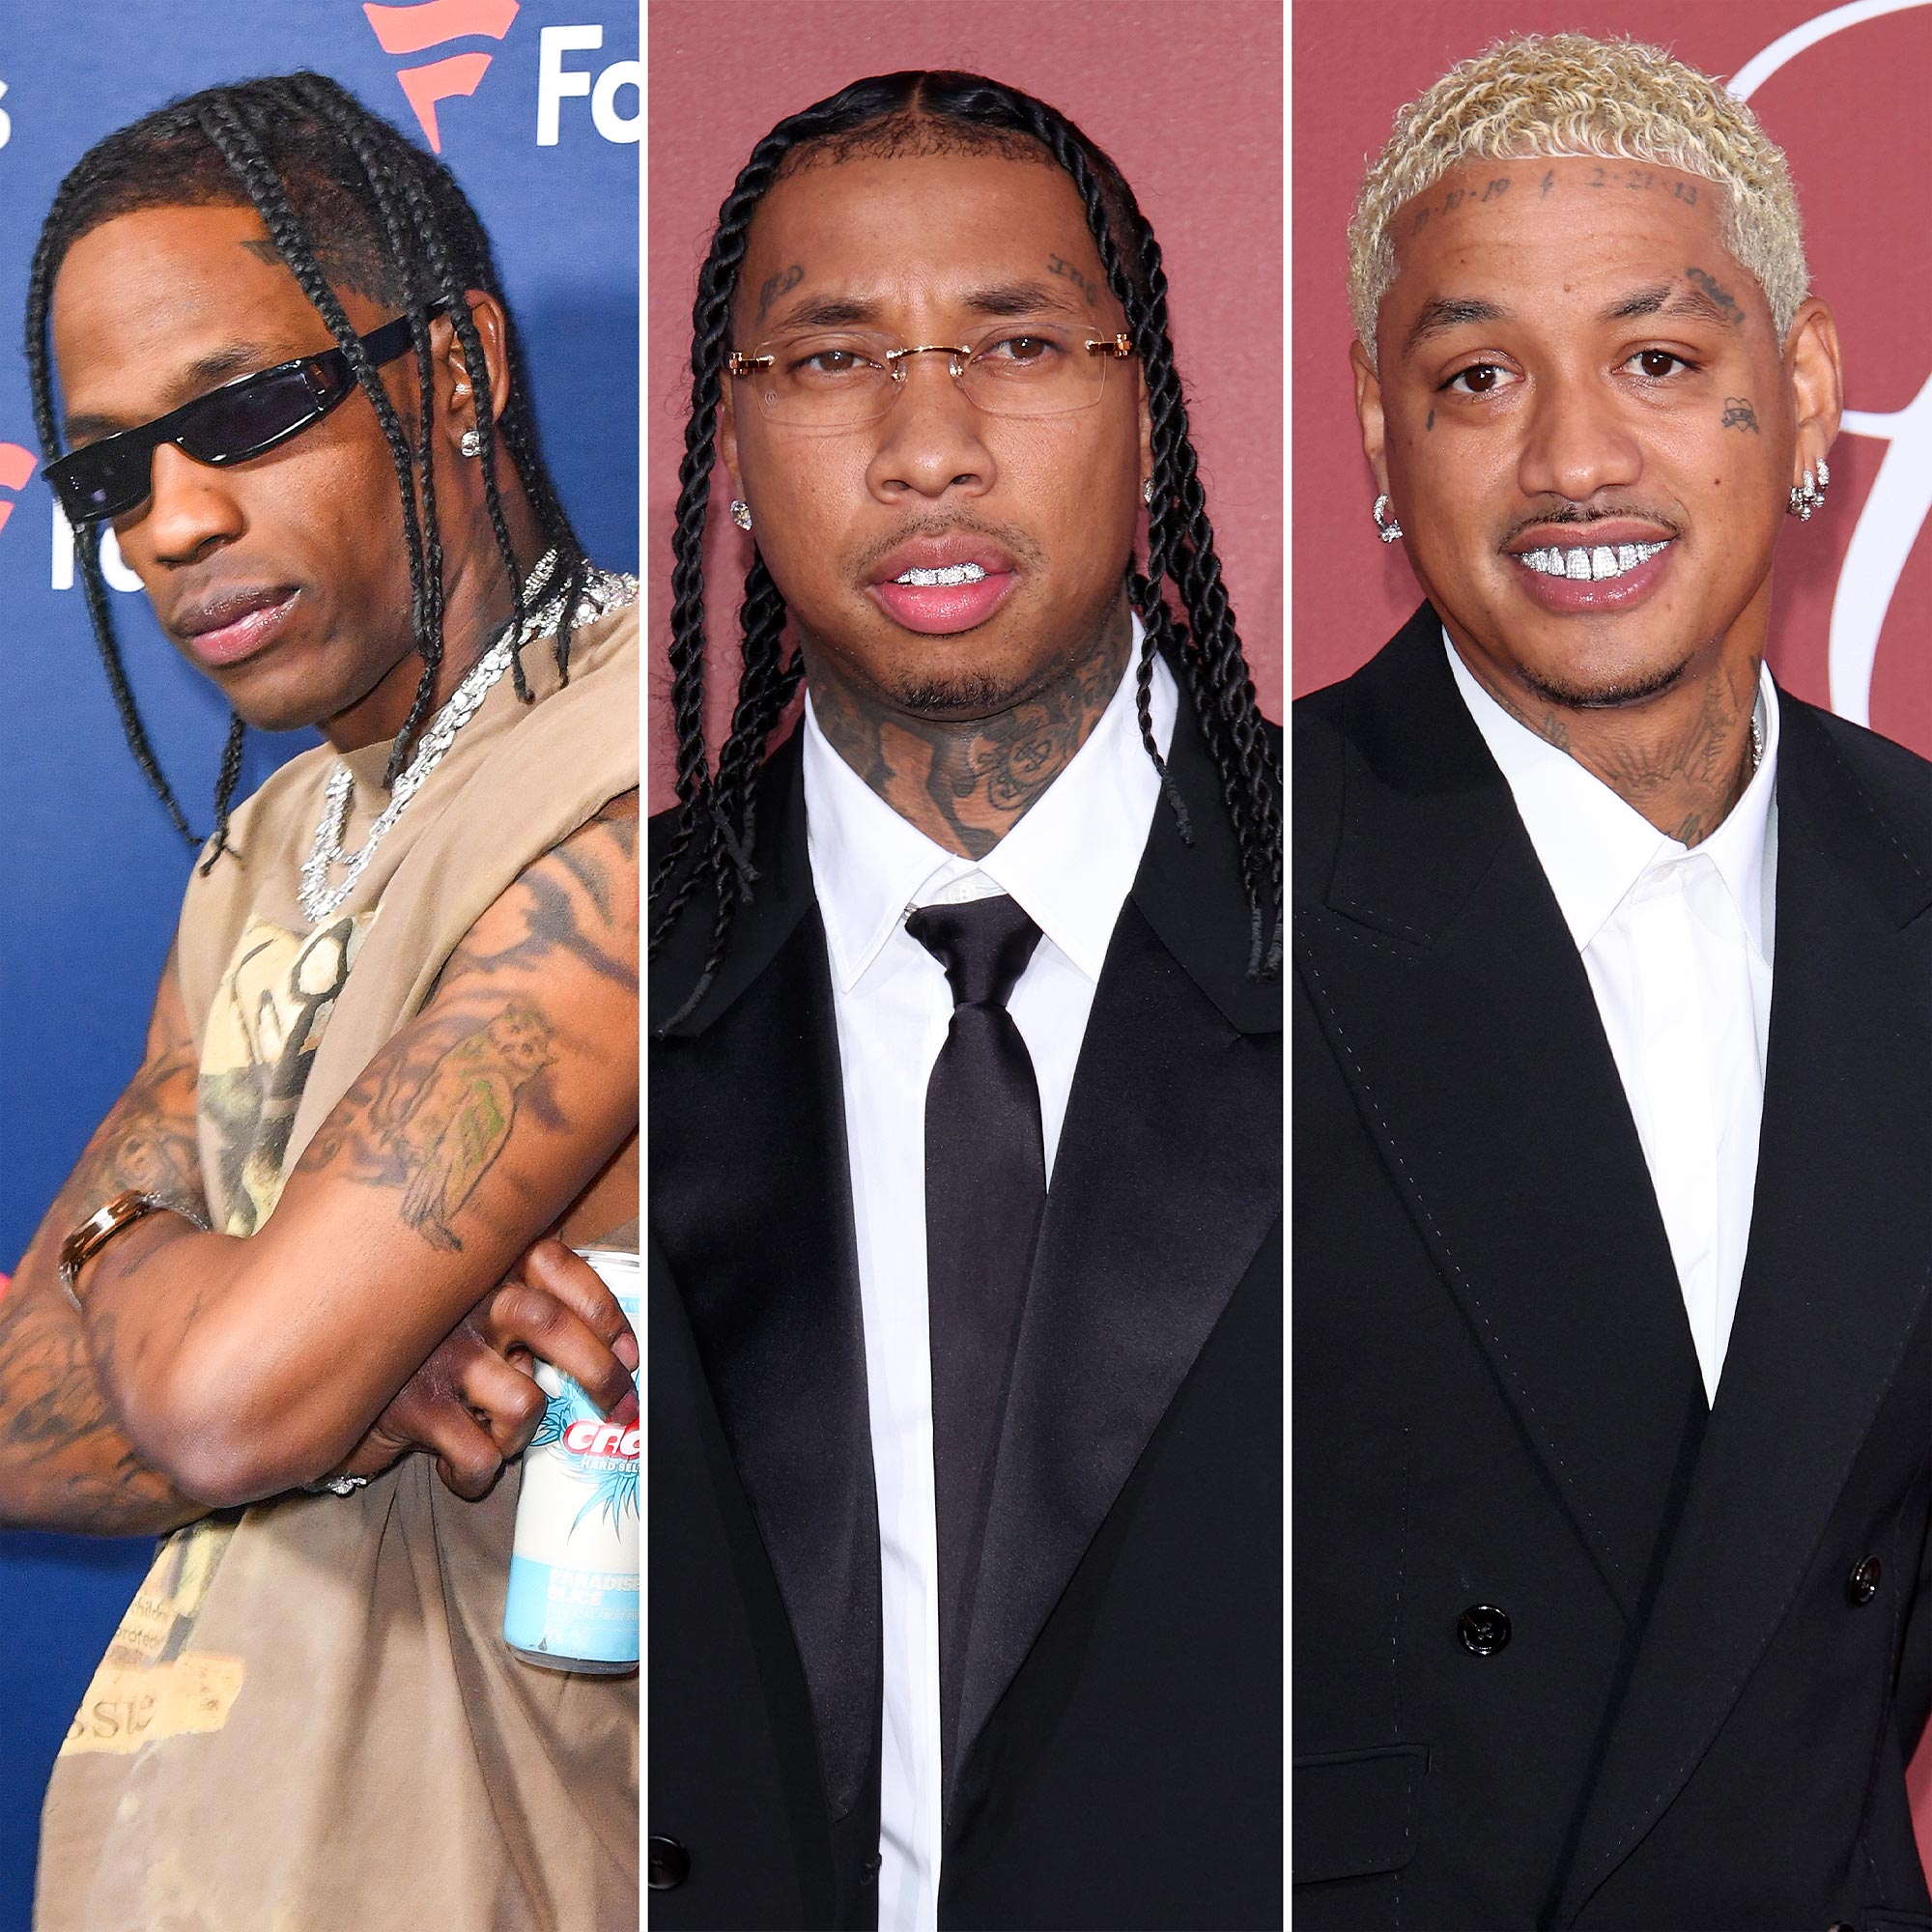 Travis Scott Gets Into Fight With Tyga's Friend AE at Cannes Film Festival thumbnail